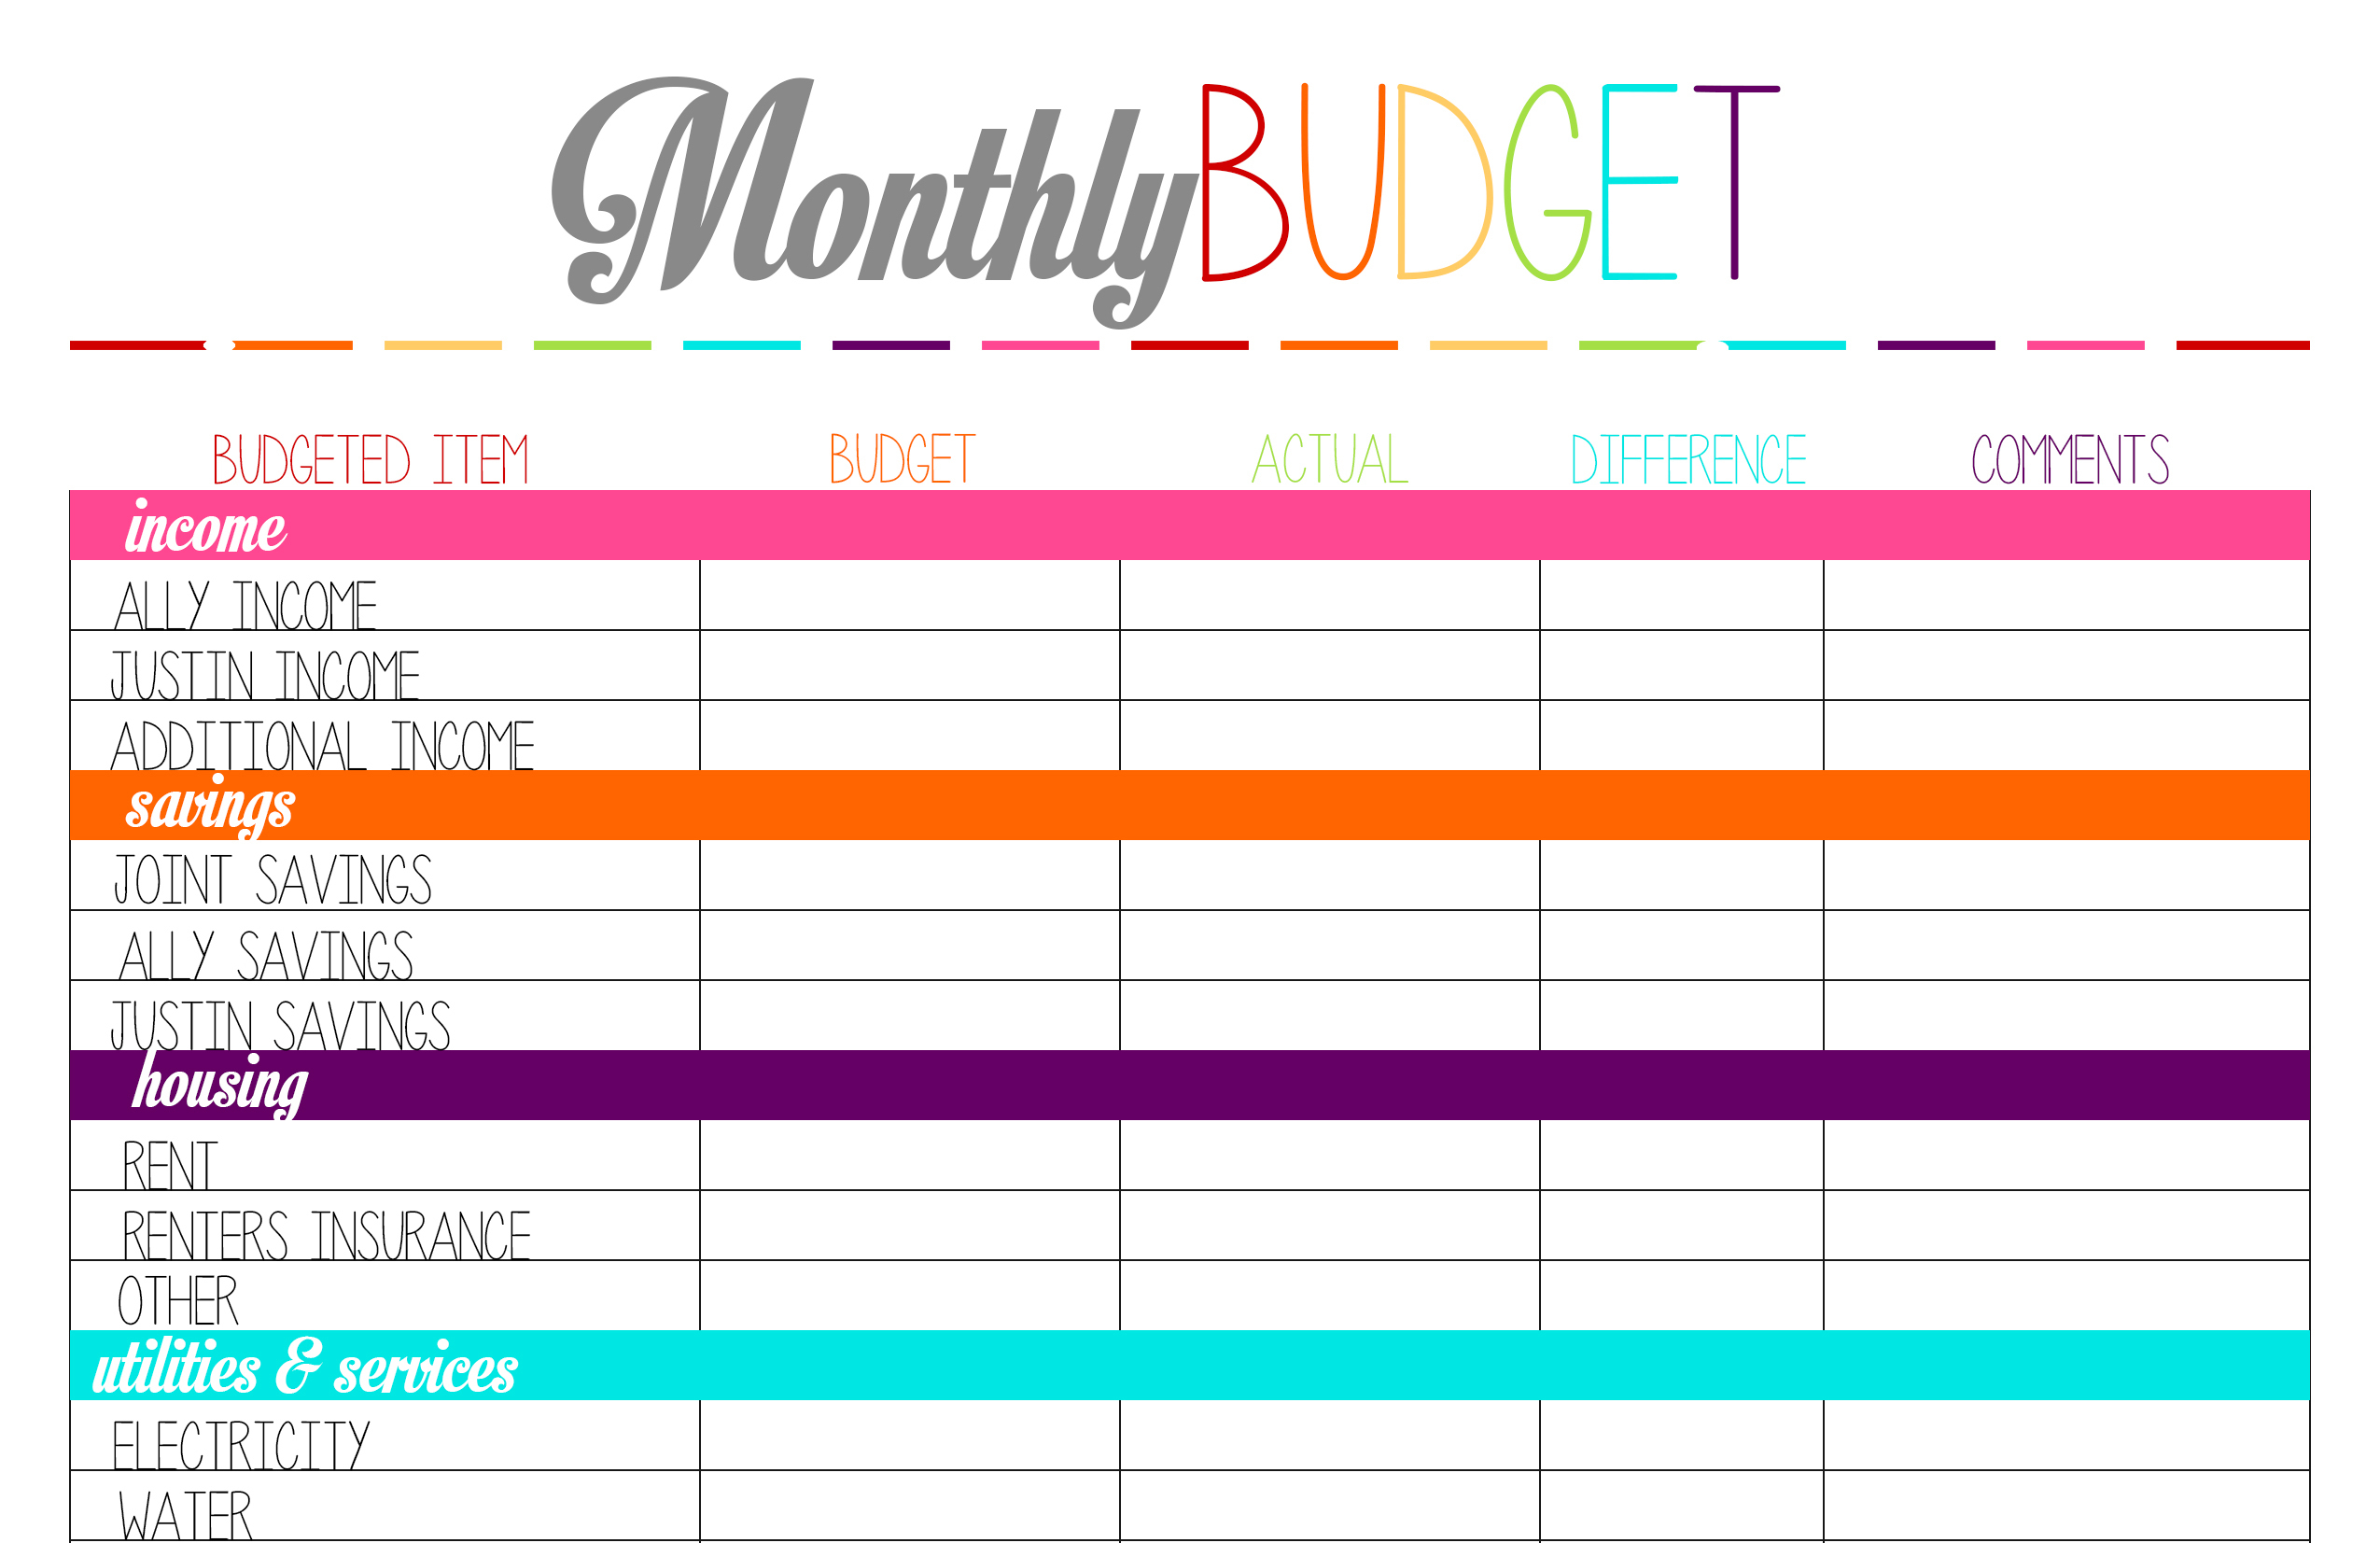 printable-weekly-budget-how-to-create-a-weekly-budget-download-this